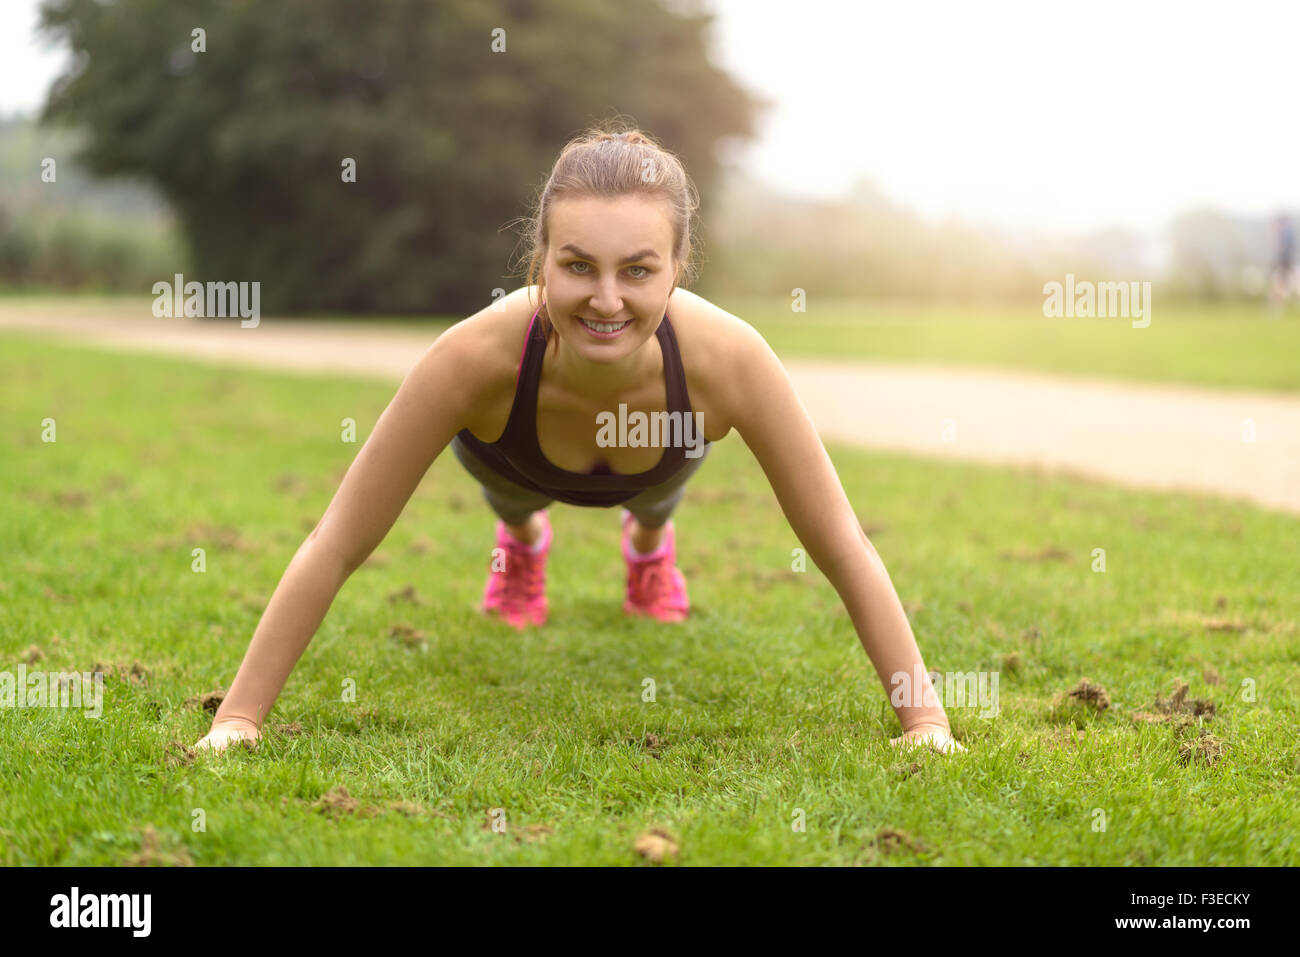 Athletic Young Woman Smiling at the Camera While Doing Push Up Exercise at the Park. Stock Photo